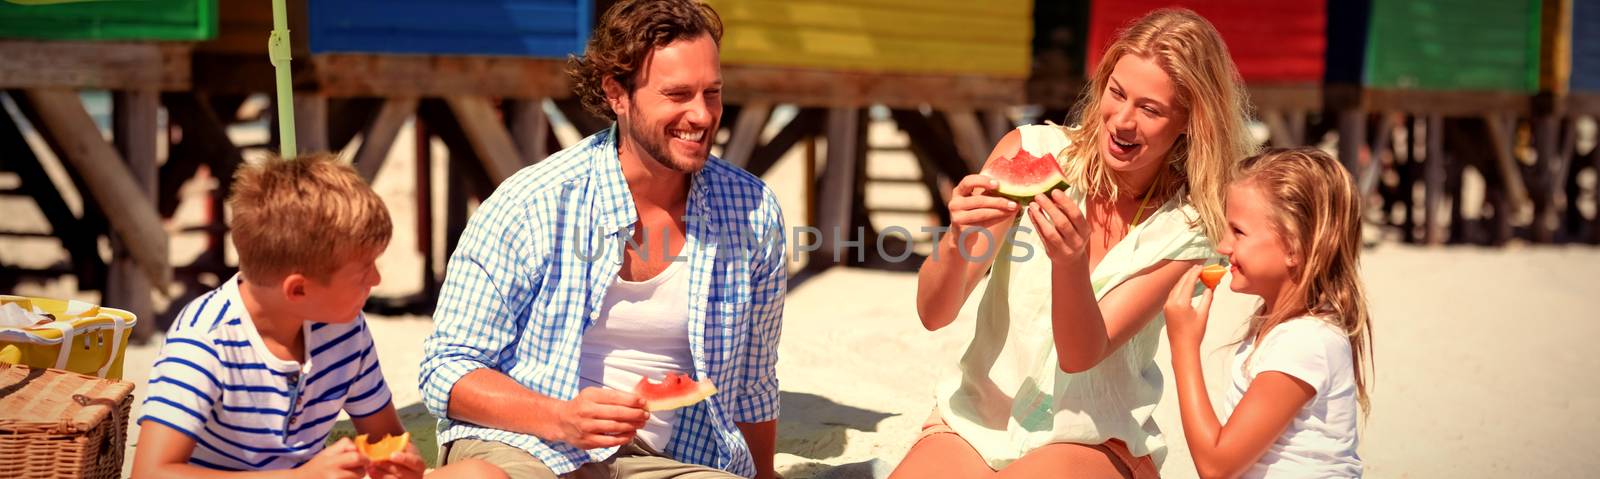 Happy family eating watermelon while sitting together on blanket at beach during sunny day